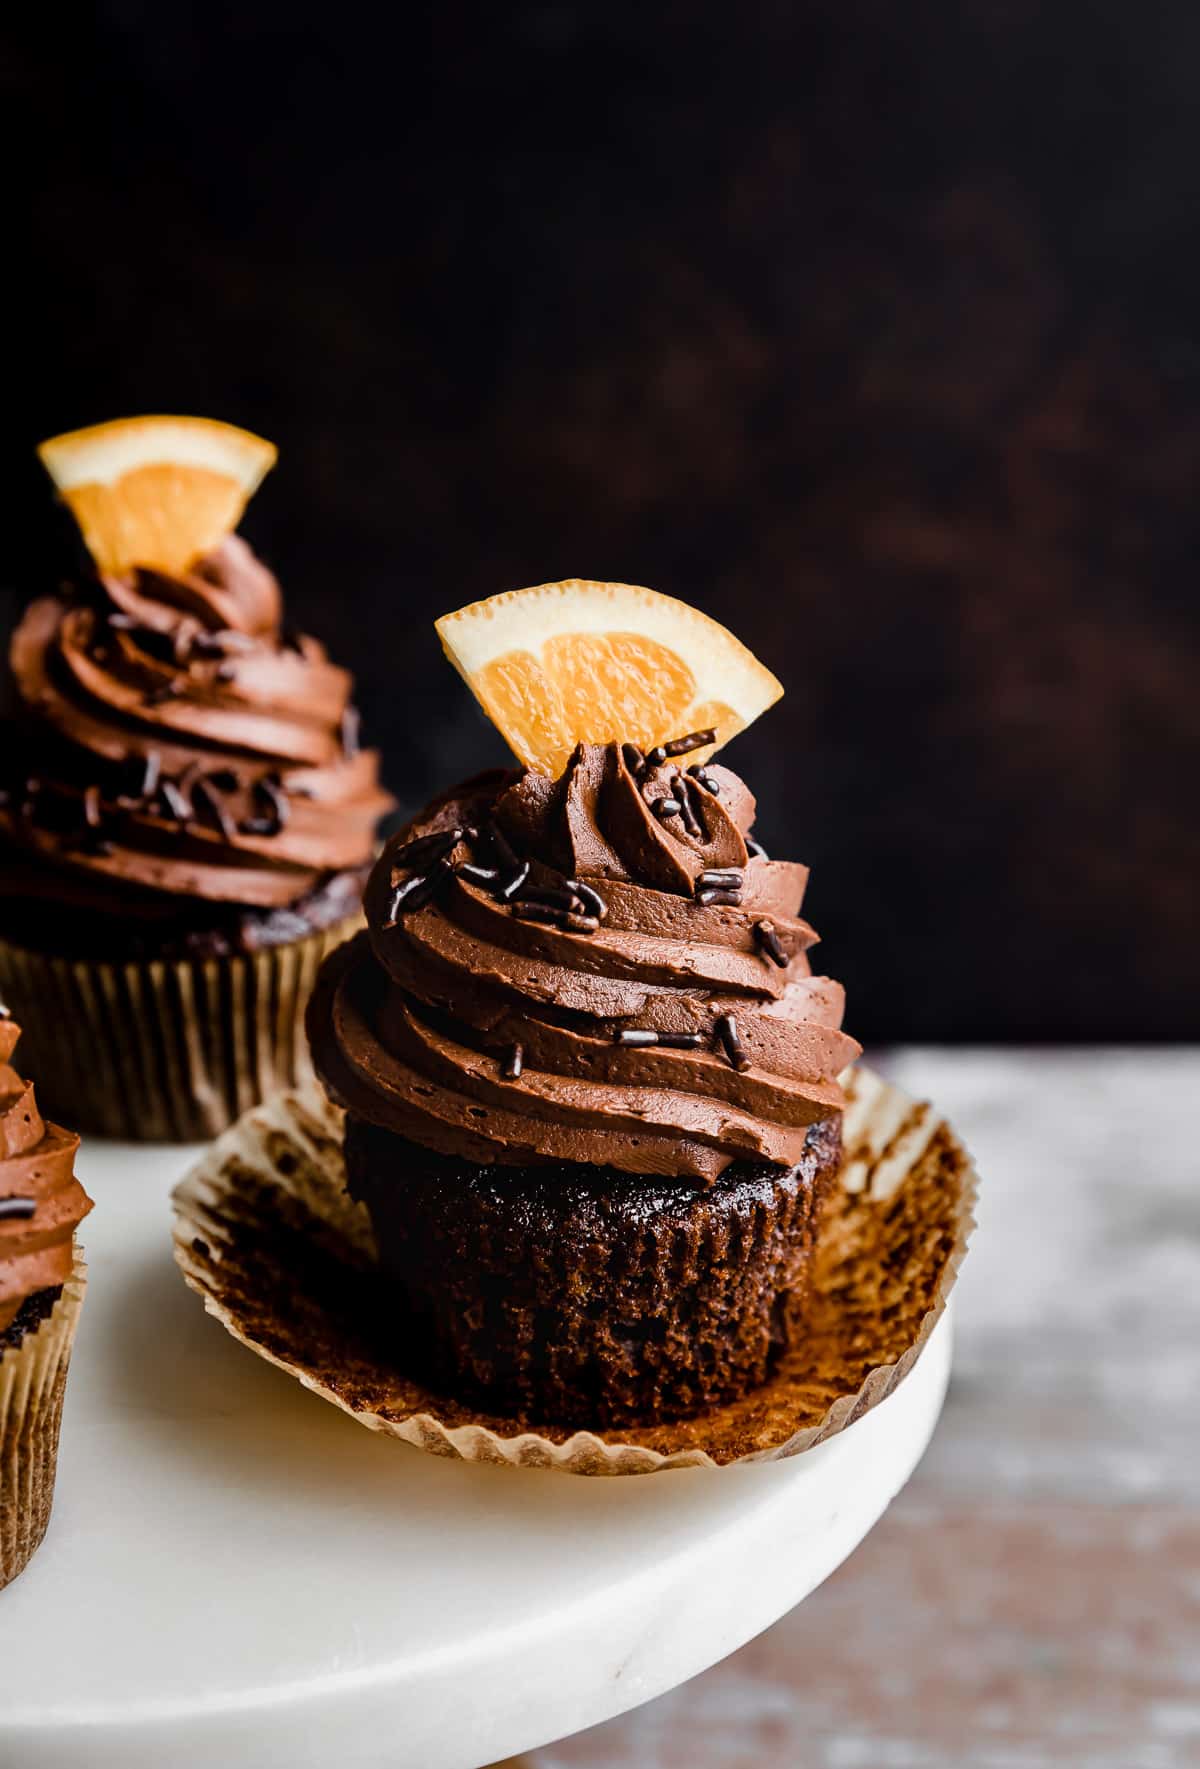 A Chocolate Orange Cupcake with a fresh orange slice on top of the frosting.